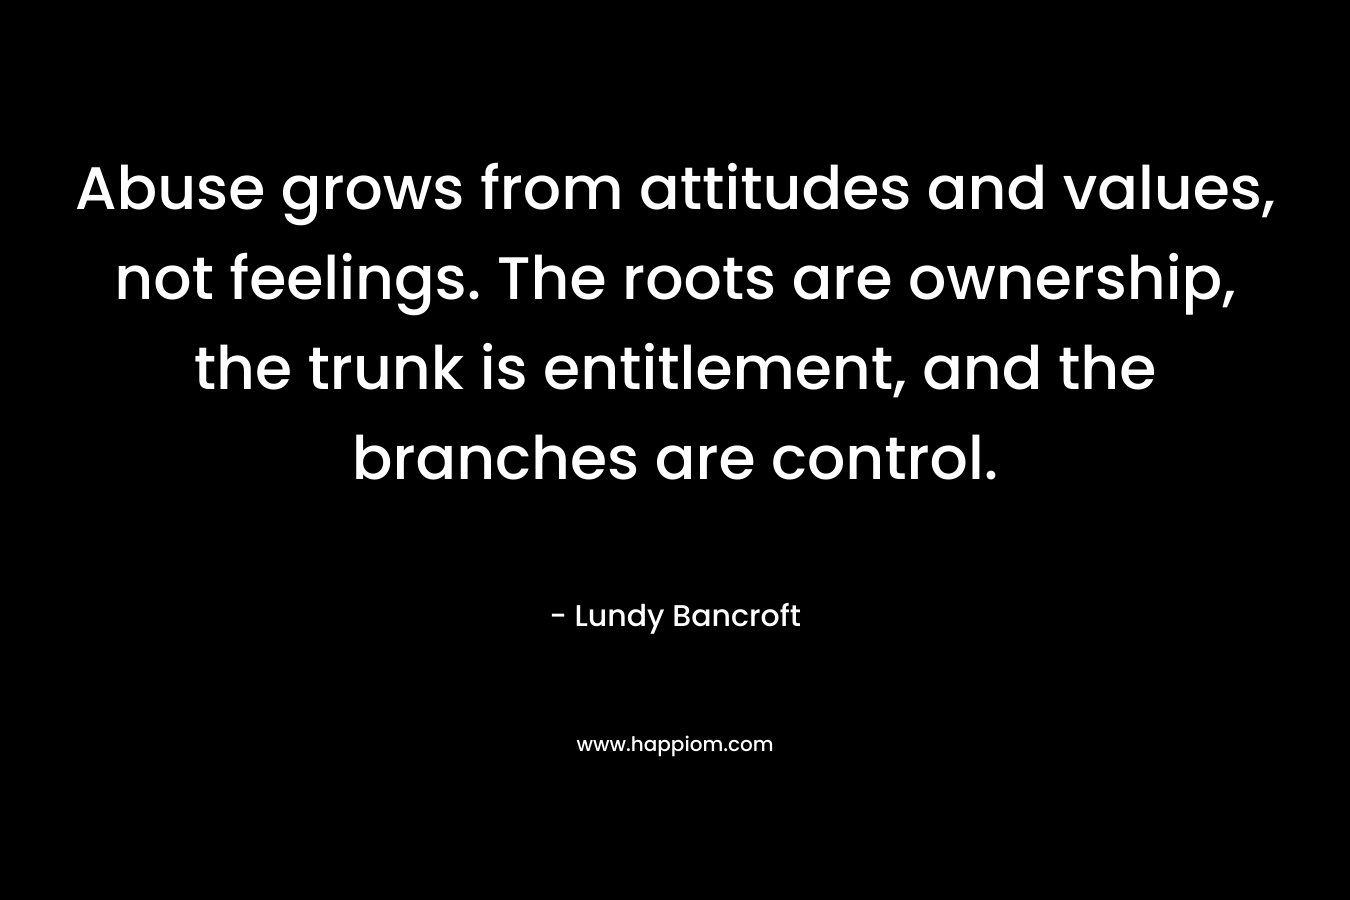 Abuse grows from attitudes and values, not feelings. The roots are ownership, the trunk is entitlement, and the branches are control. – Lundy Bancroft